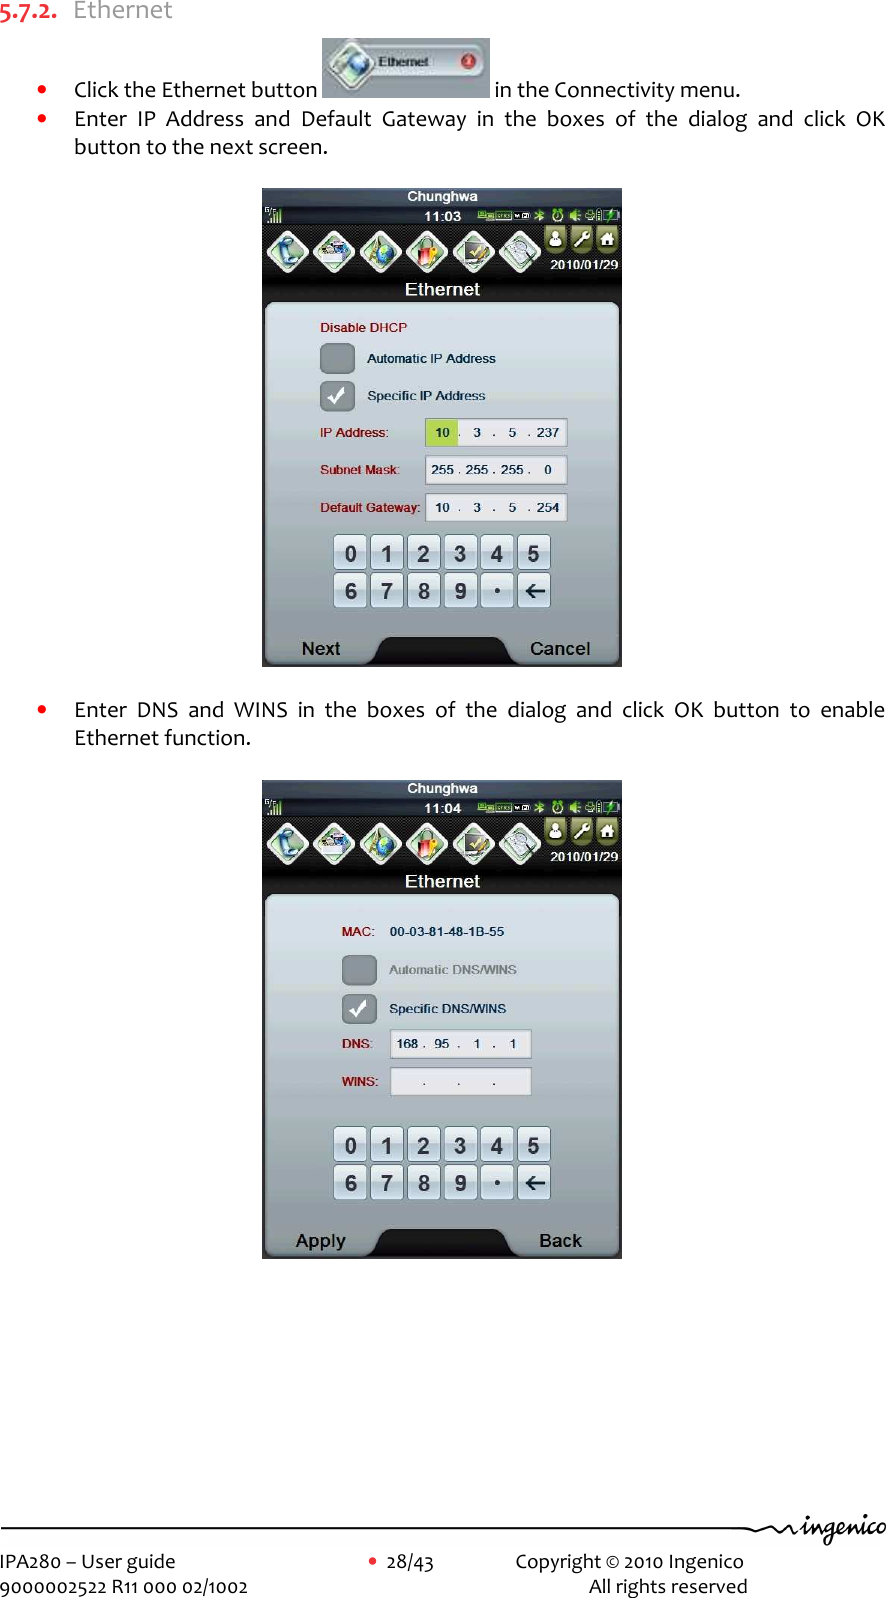     IPA280 – User guide      •  28/43    Copyright © 2010 Ingenico   9000002522 R11 000 02/1002          All rights reserved        5.7.2. Ethernet • Click the Ethernet button   in the Connectivity menu.   • Enter  IP  Address  and  Default  Gateway  in  the  boxes  of  the  dialog  and  click  OK button to the next screen.    • Enter  DNS  and  WINS  in  the  boxes  of  the  dialog  and  click  OK  button  to  enable Ethernet function.          